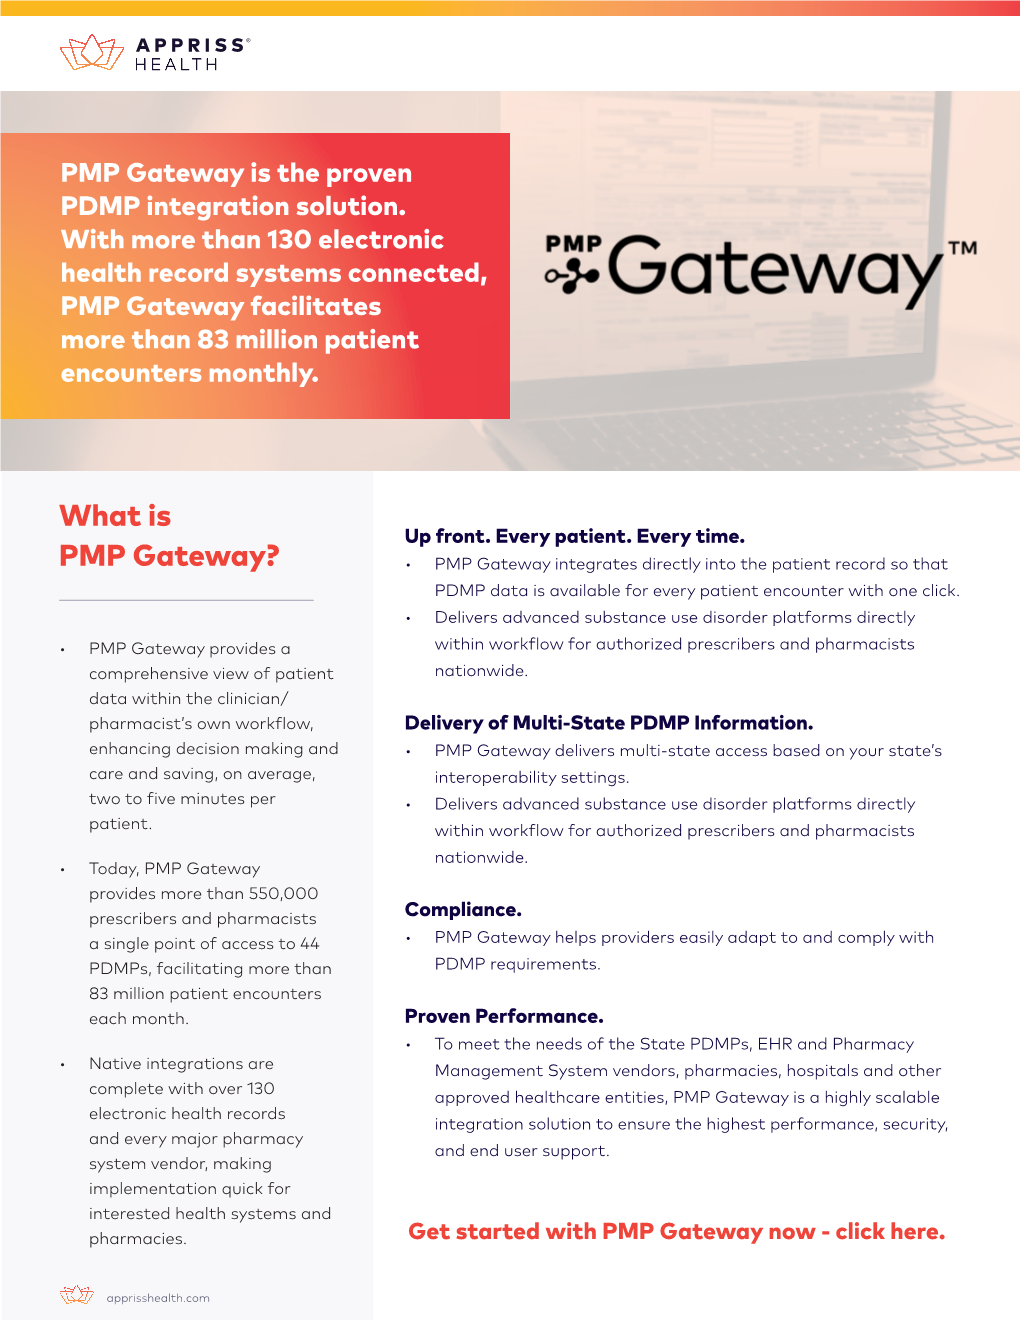 What Is PMP Gateway?